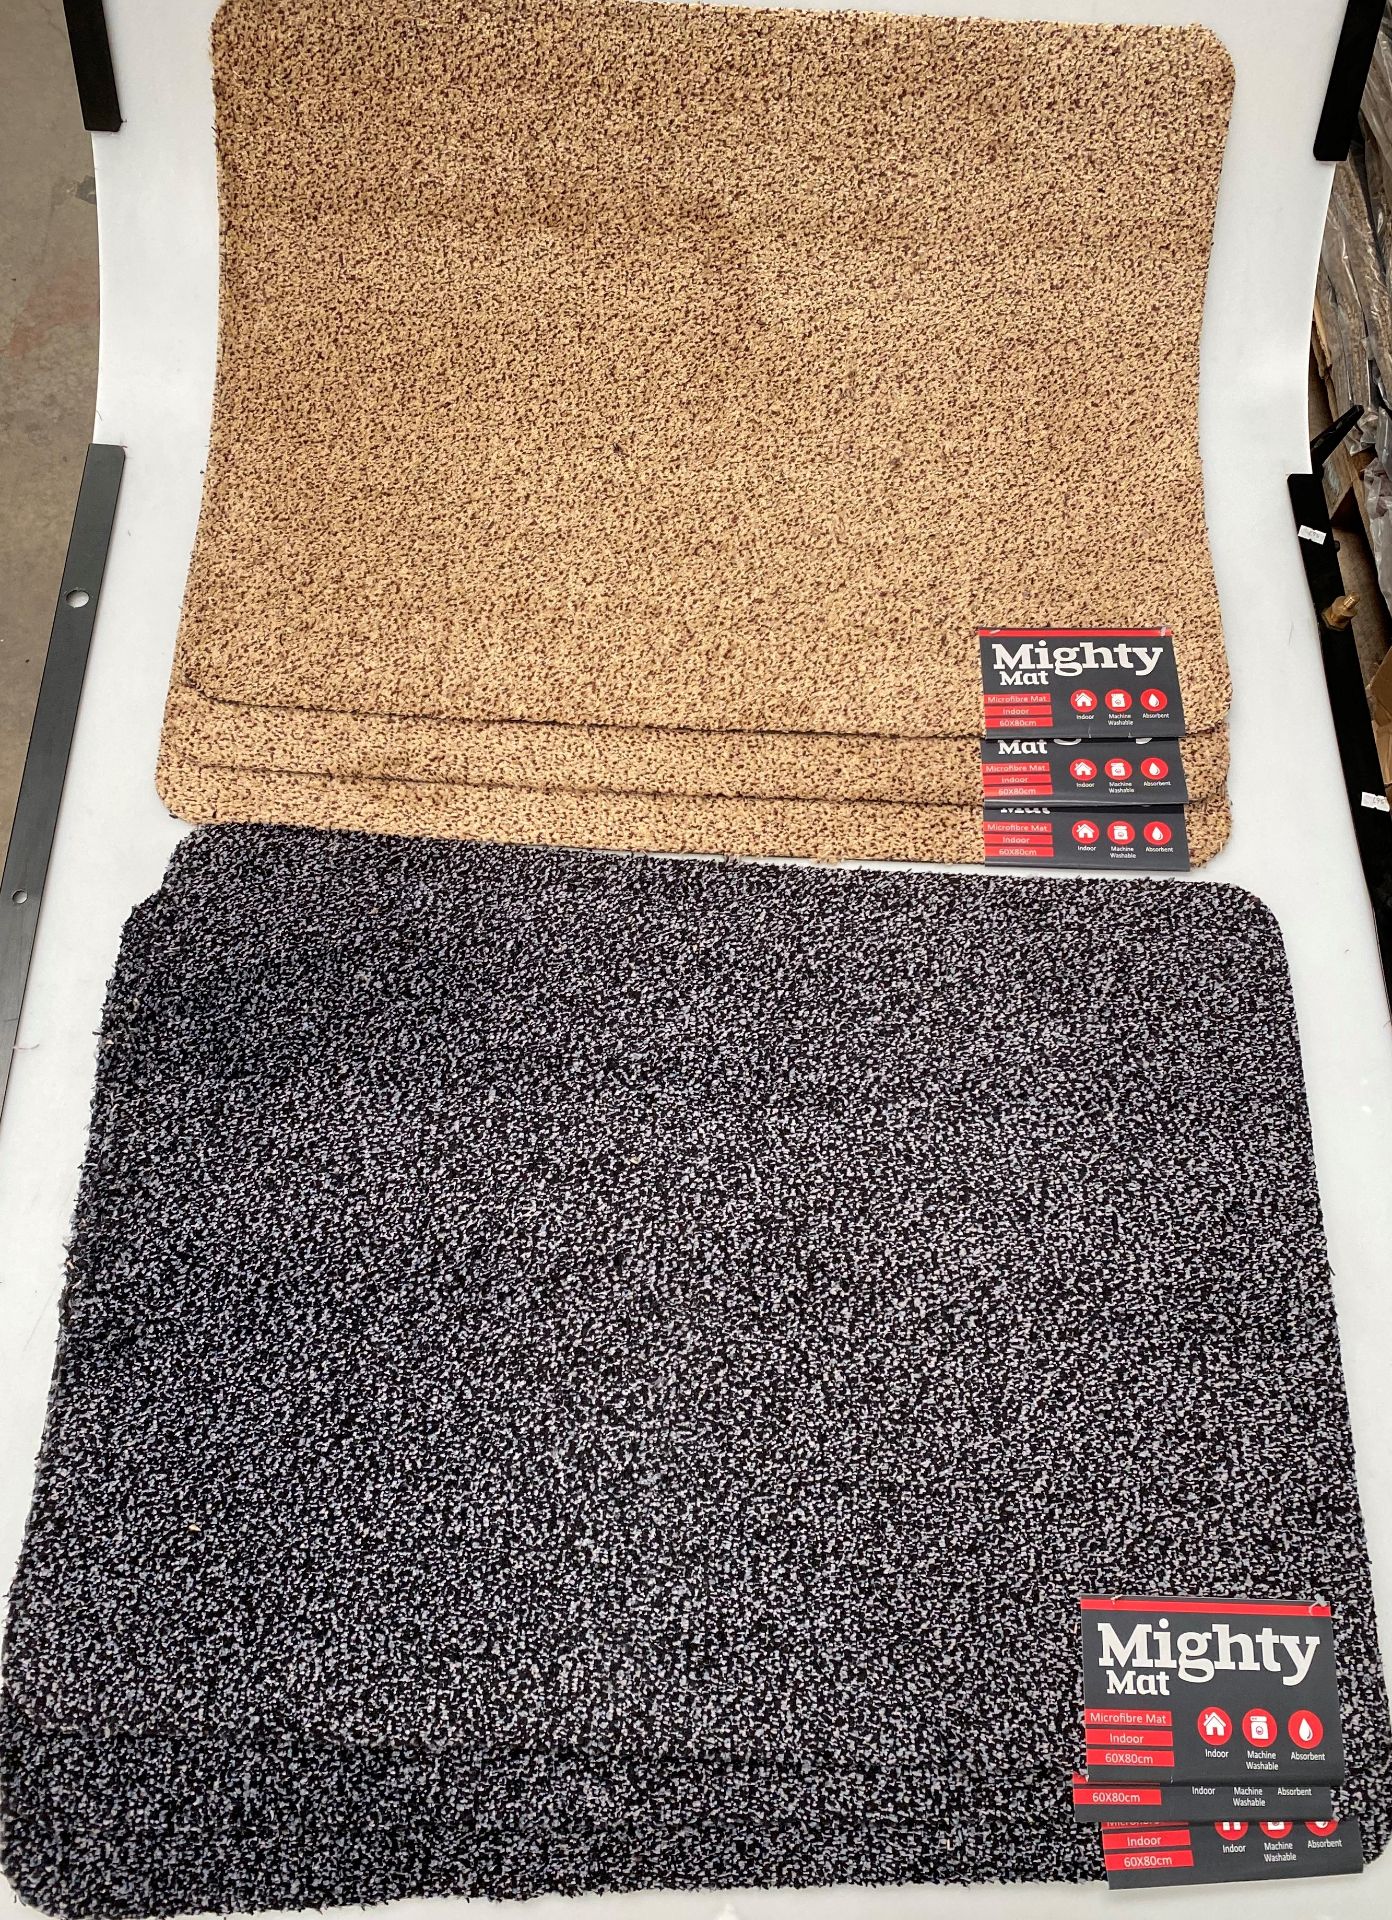 12 x Homebase Mighty Mats in assorted colours (black and beige in each pack of 6) - 60cm x 80cm